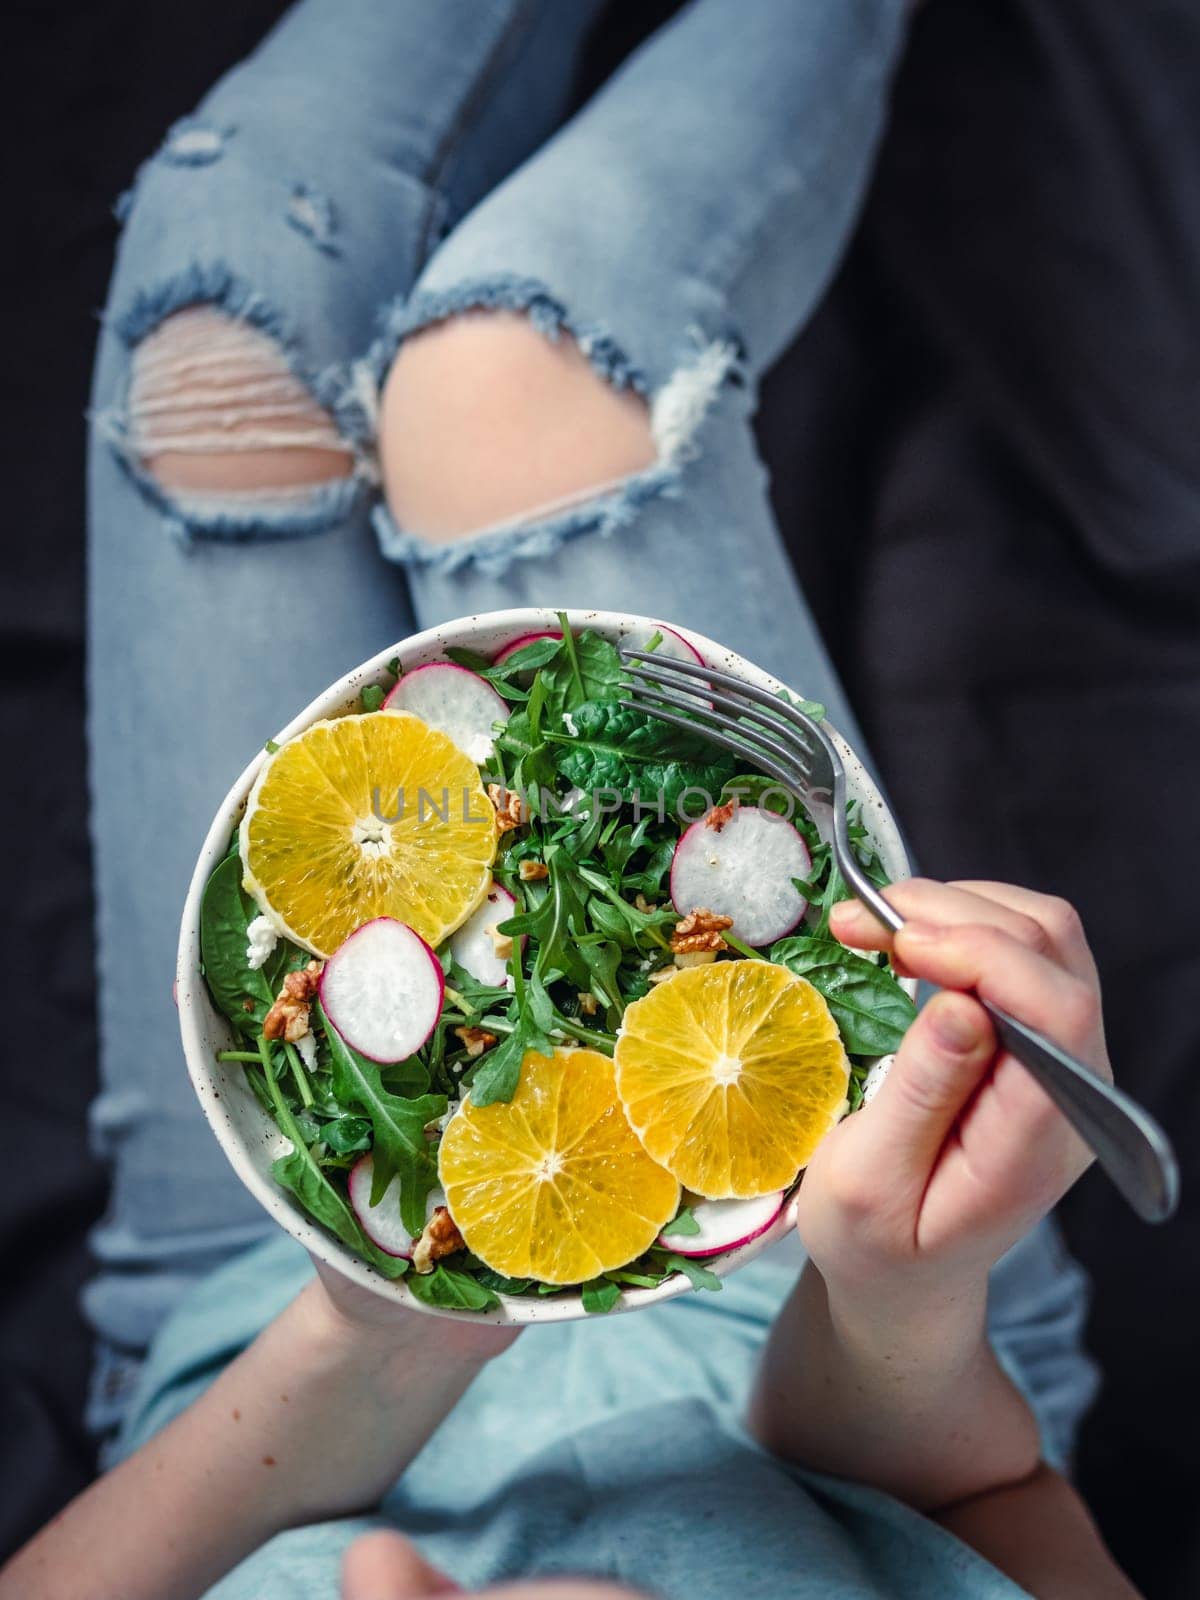 Woman in jeans at bed, holding vegan salad bowl with oranges, spinach,arugula,radish,nut.Top view.Vegan breakfast,vegetarian food,diet concept.Girl in jeans holding fork with knees and hands visible